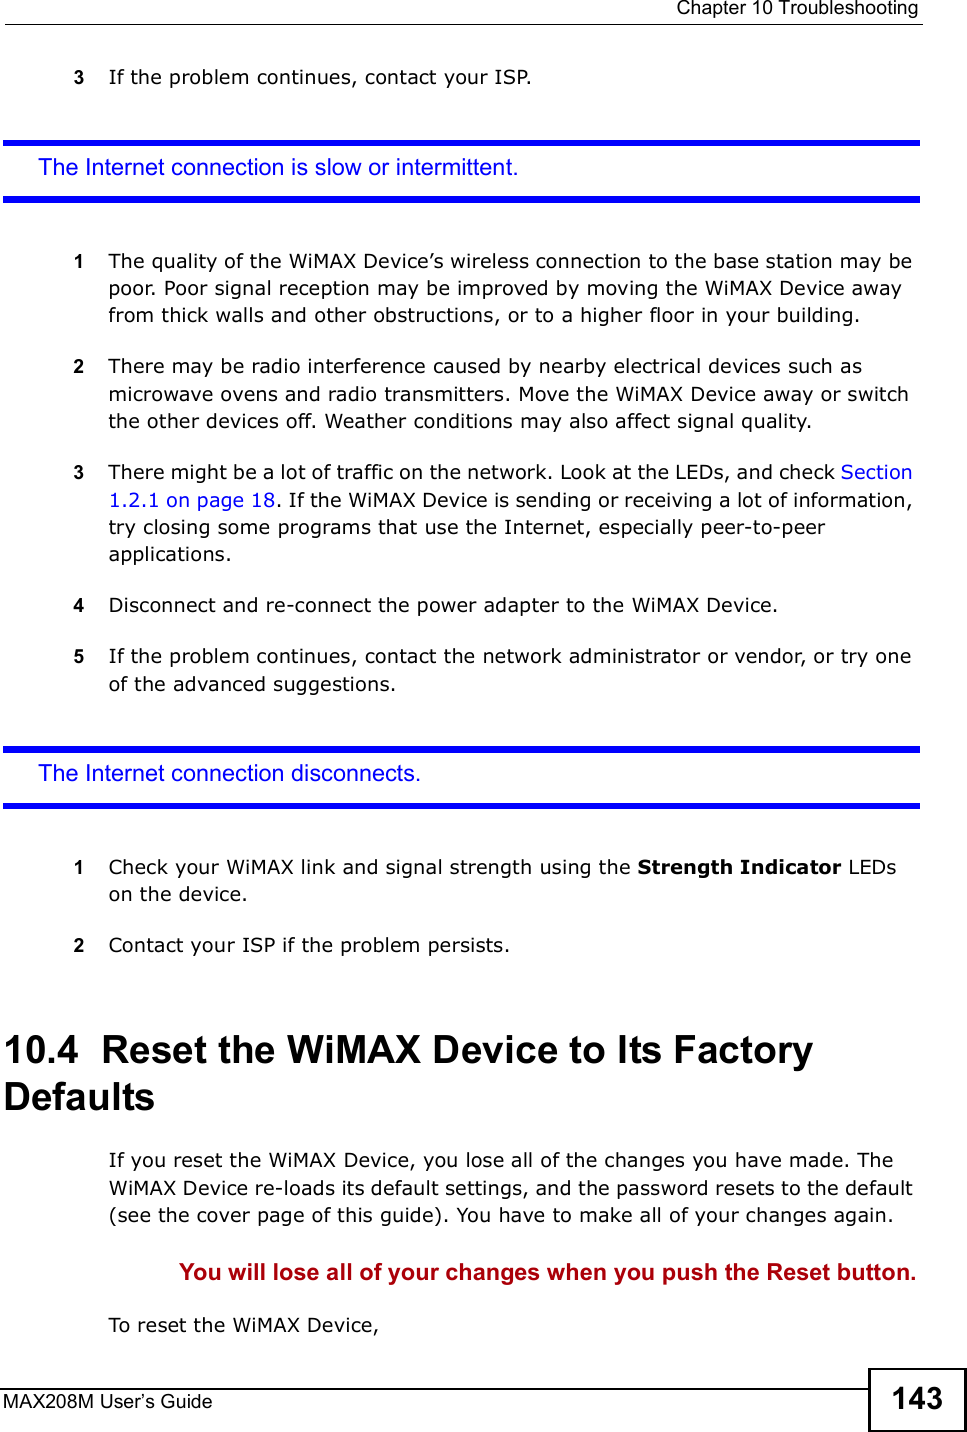  Chapter 10TroubleshootingMAX208M User s Guide 1433If the problem continues, contact your ISP.The Internet connection is slow or intermittent.1The quality of the WiMAX Device s wireless connection to the base station may be poor. Poor signal reception may be improved by moving the WiMAX Device away from thick walls and other obstructions, or to a higher floor in your building. 2There may be radio interference caused by nearby electrical devices such as microwave ovens and radio transmitters. Move the WiMAX Device away or switch the other devices off. Weather conditions may also affect signal quality.3There might be a lot of traffic on the network. Look at the LEDs, and check Section 1.2.1 on page 18. If the WiMAX Device is sending or receiving a lot of information, try closing some programs that use the Internet, especially peer-to-peer applications.4Disconnect and re-connect the power adapter to the WiMAX Device.5If the problem continues, contact the network administrator or vendor, or try one of the advanced suggestions.The Internet connection disconnects.1Check your WiMAX link and signal strength using the Strength Indicator LEDs on the device.2Contact your ISP if the problem persists.10.4  Reset the WiMAX Device to Its Factory DefaultsIf you reset the WiMAX Device, you lose all of the changes you have made. The WiMAX Device re-loads its default settings, and the password resets to the default (see the cover page of this guide). You have to make all of your changes again.You will lose all of your changes when you push the Reset button.To reset the WiMAX Device,